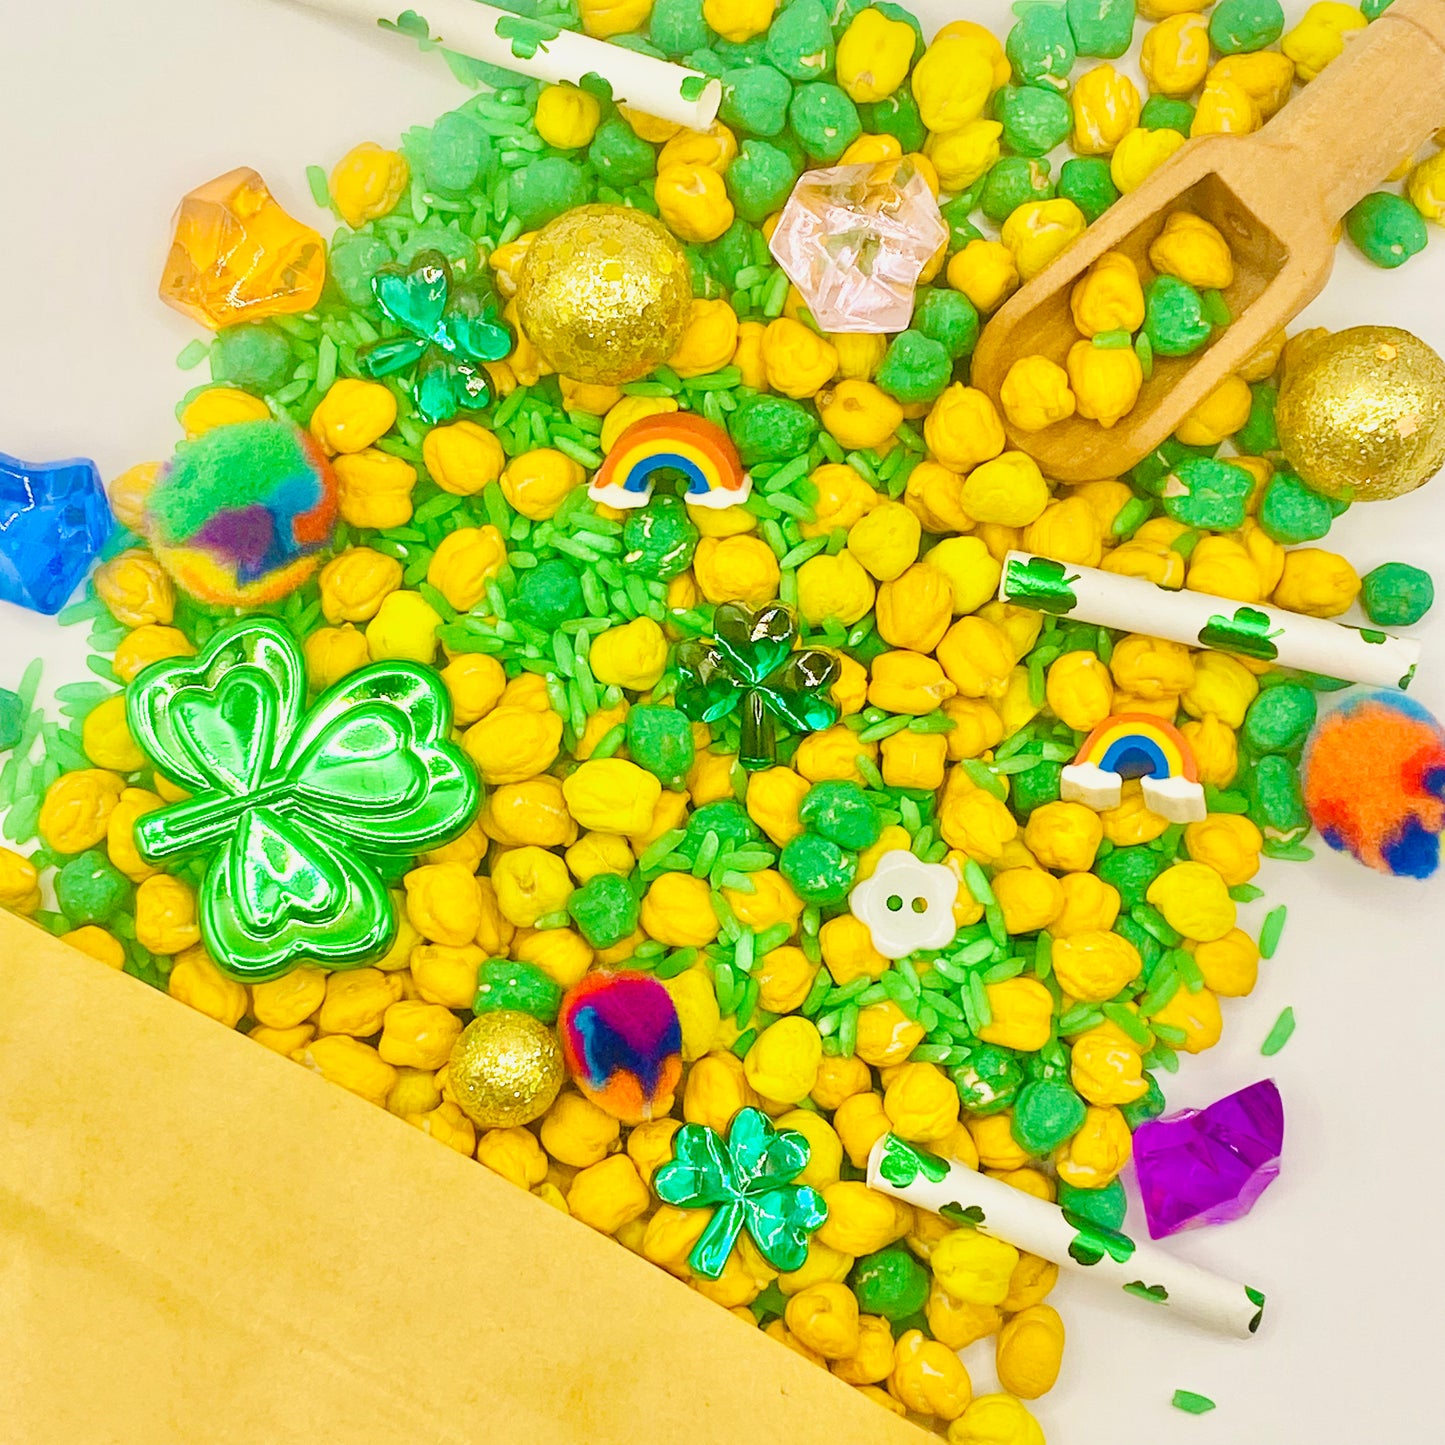 St. Patricks Day Discovery Pack Filler Activity Toys Poppy and Pine Creations   